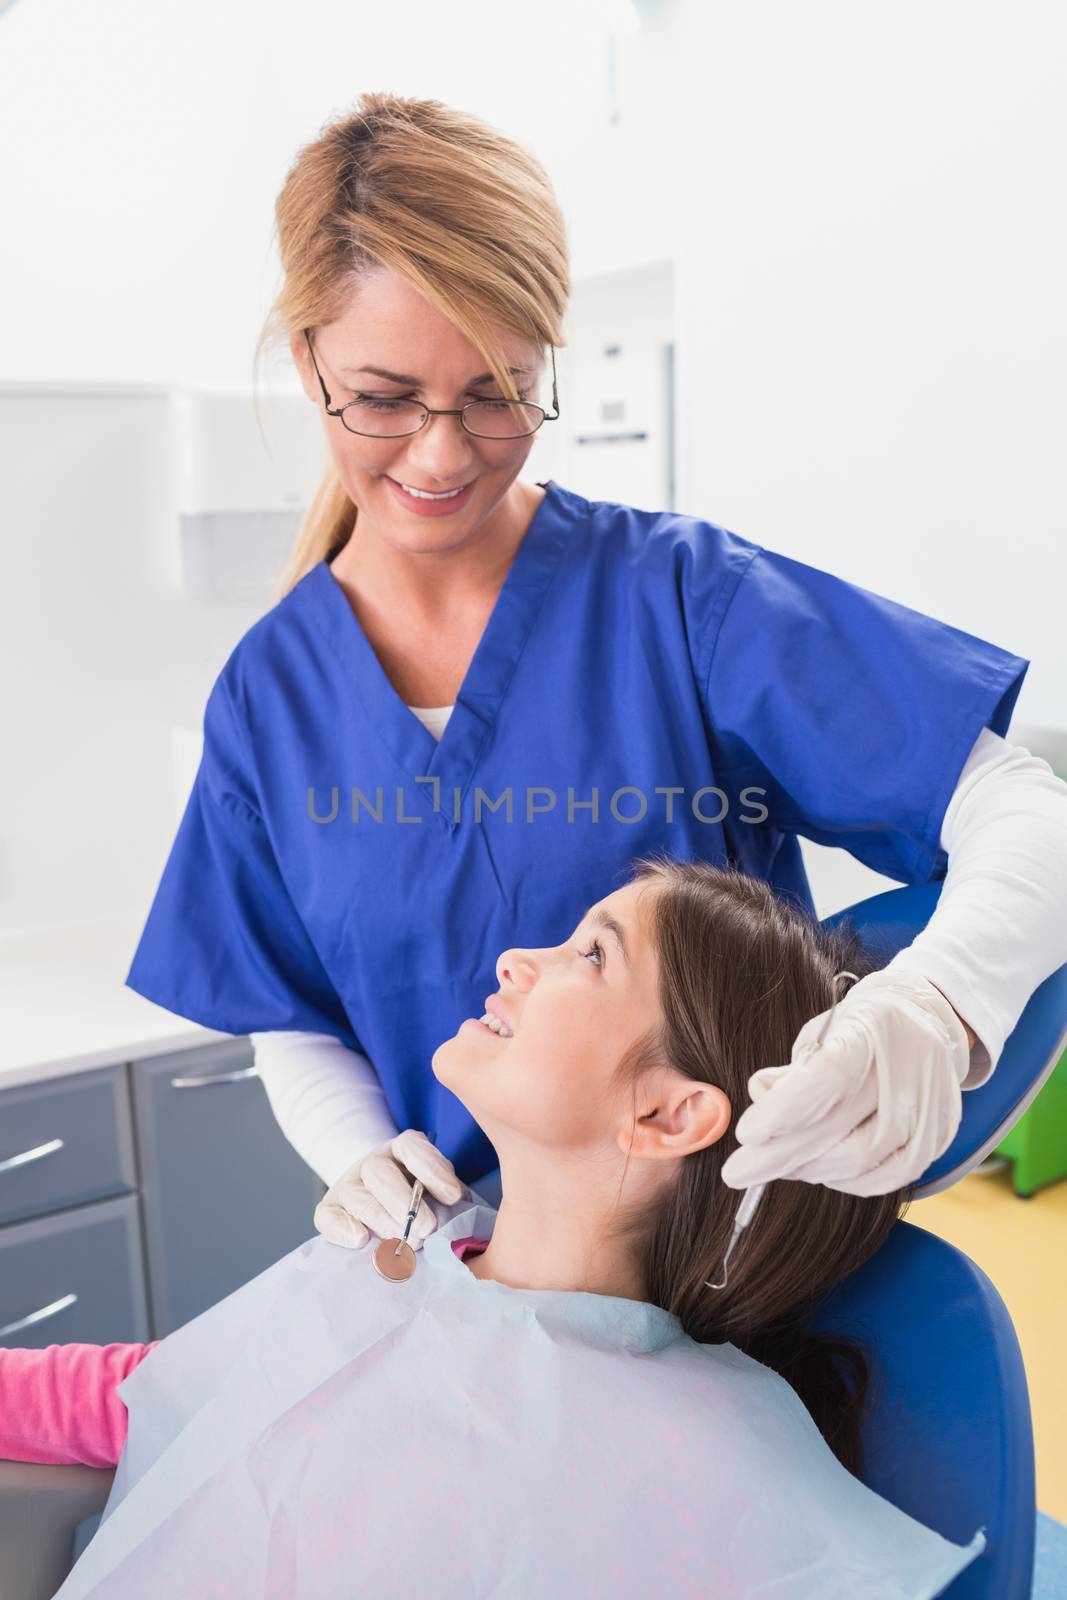 Smiling pediatric dentist with a happy young patient  by Wavebreakmedia